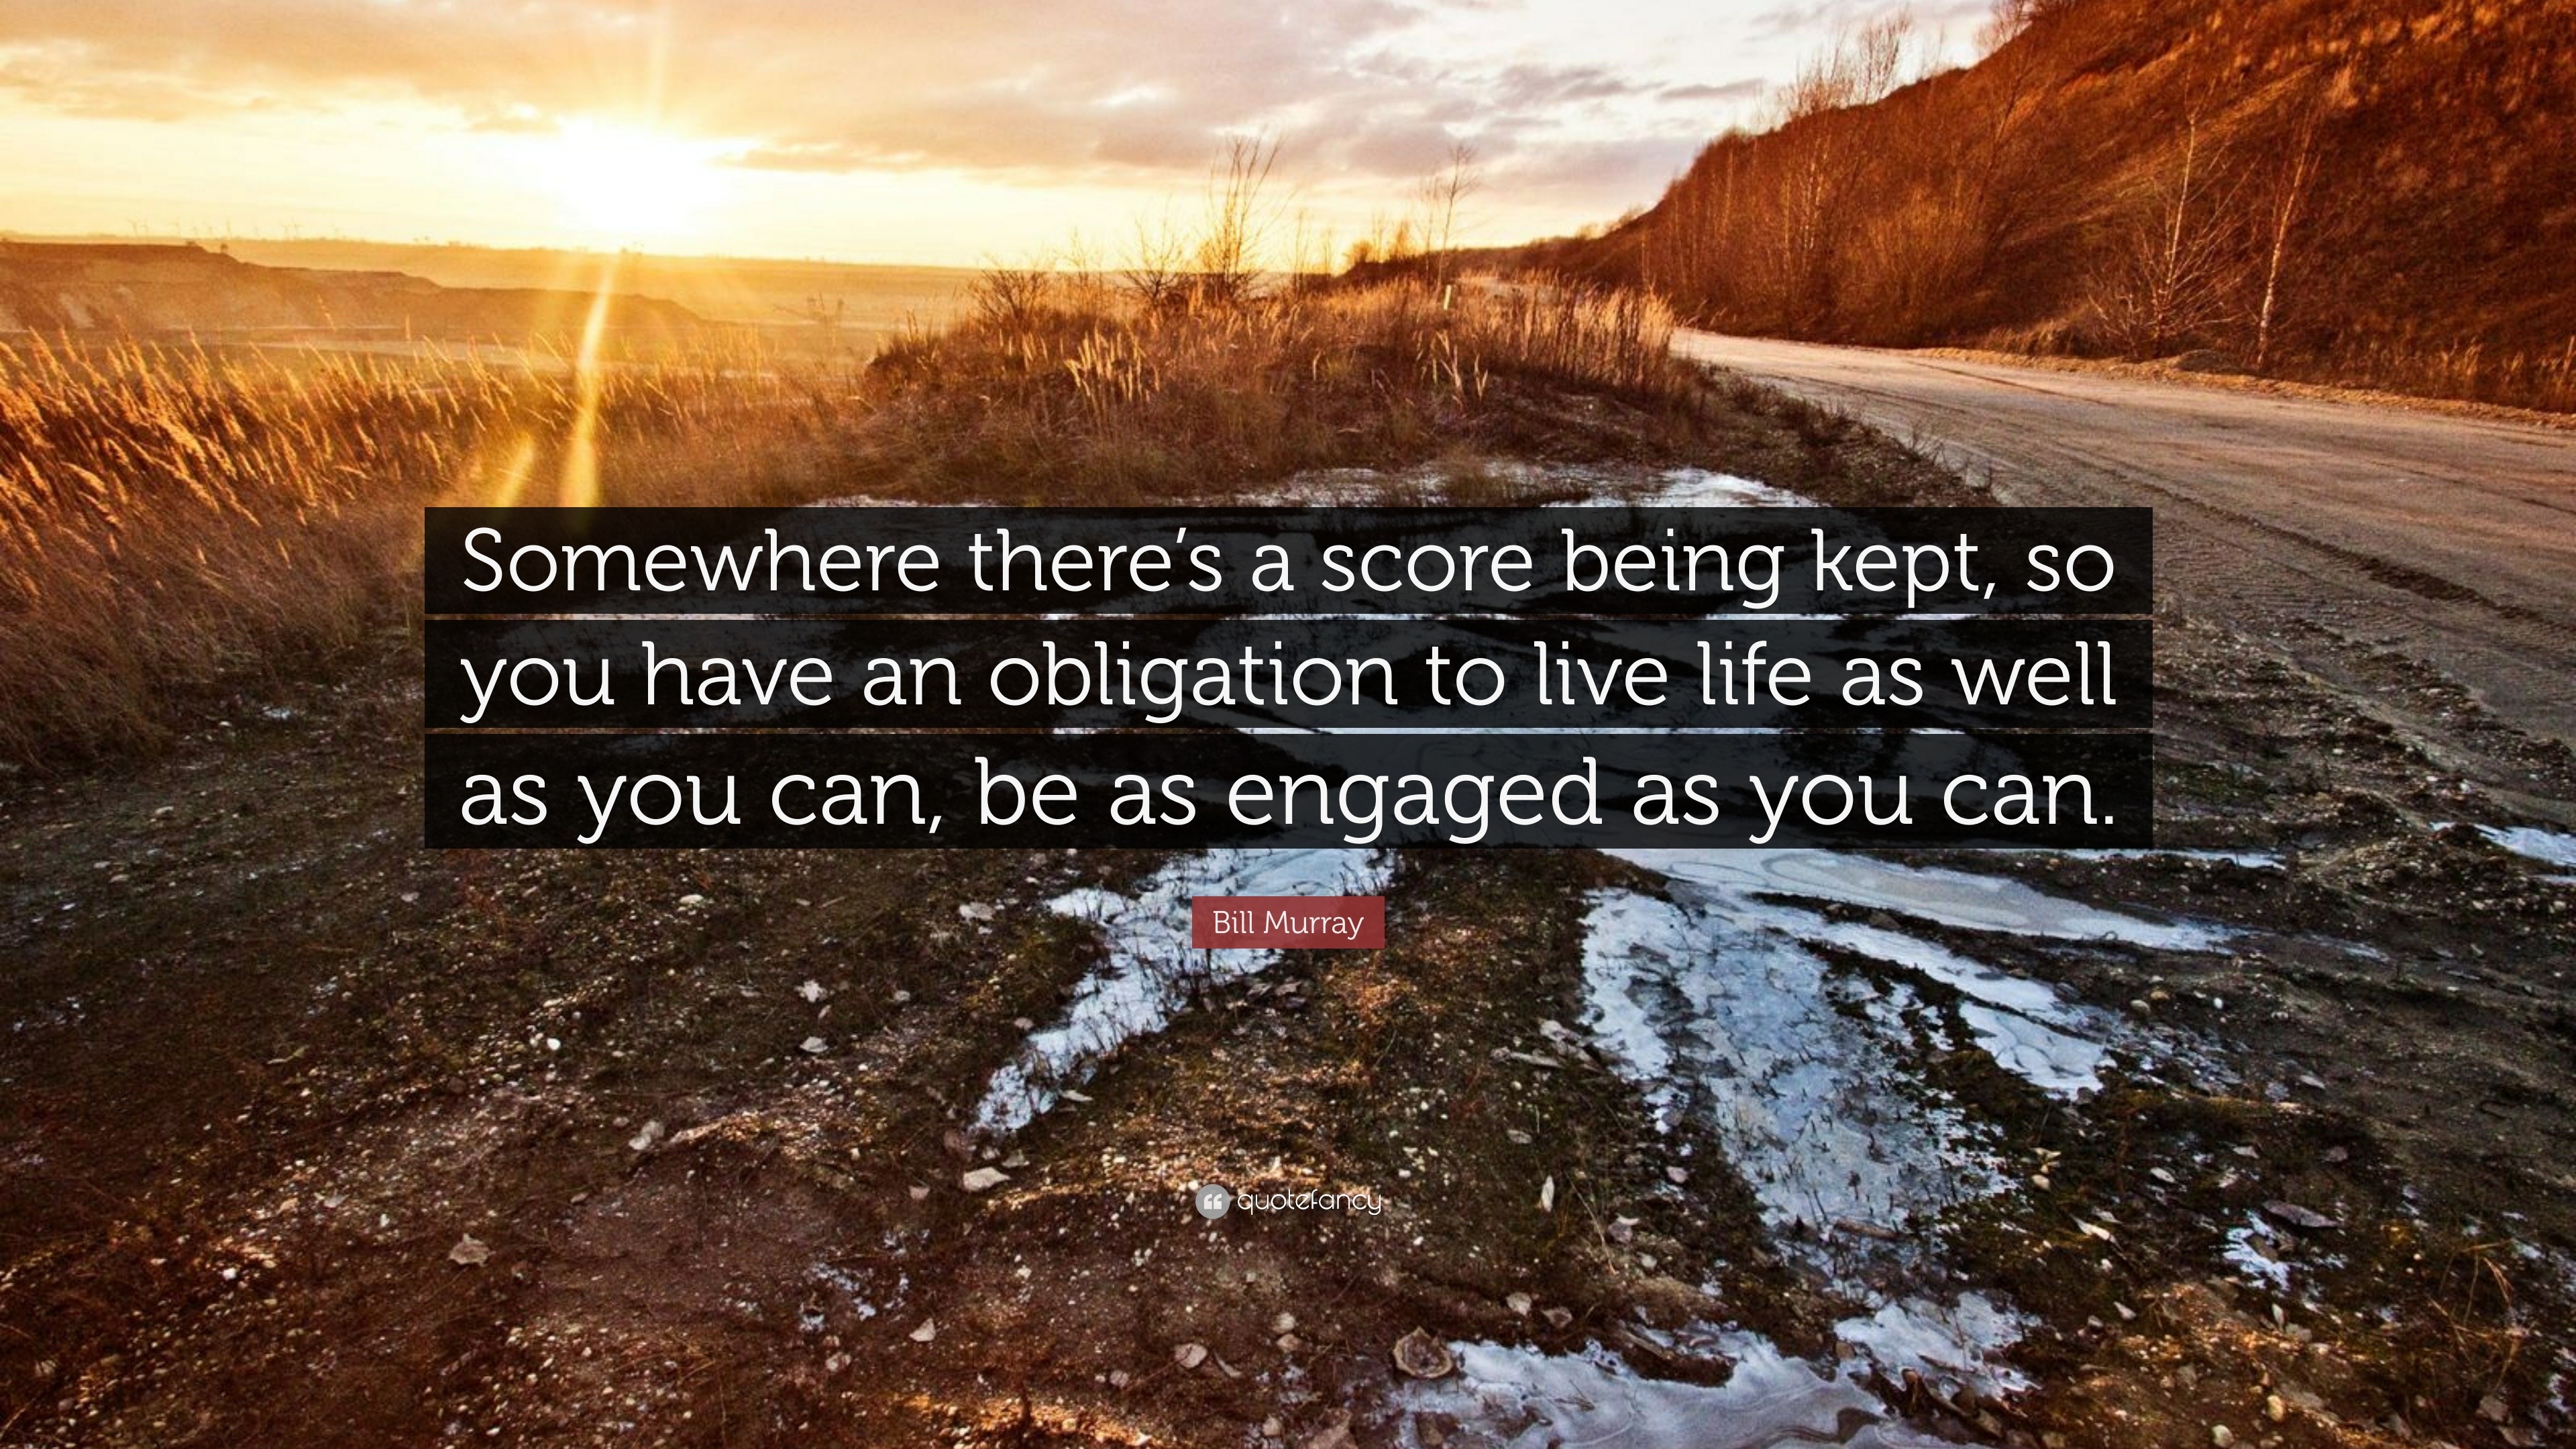 Bill Murray Quote “Somewhere theres a score being kept, so you have an obligation to live life as well as you can, be as engaged as you ca...”